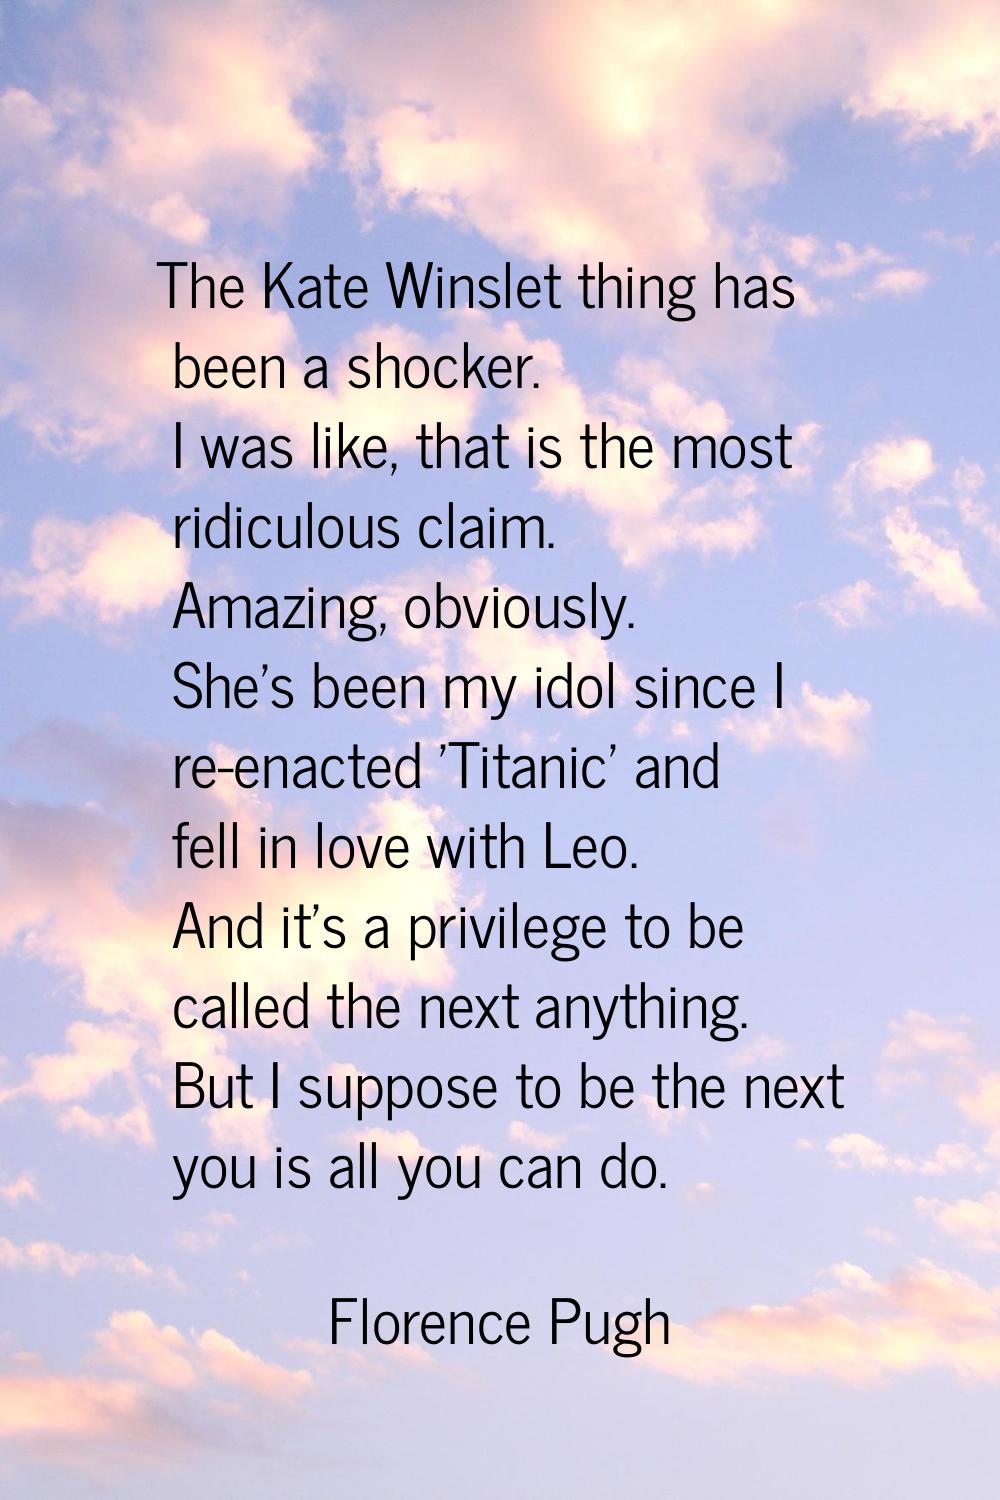 The Kate Winslet thing has been a shocker. I was like, that is the most ridiculous claim. Amazing, 